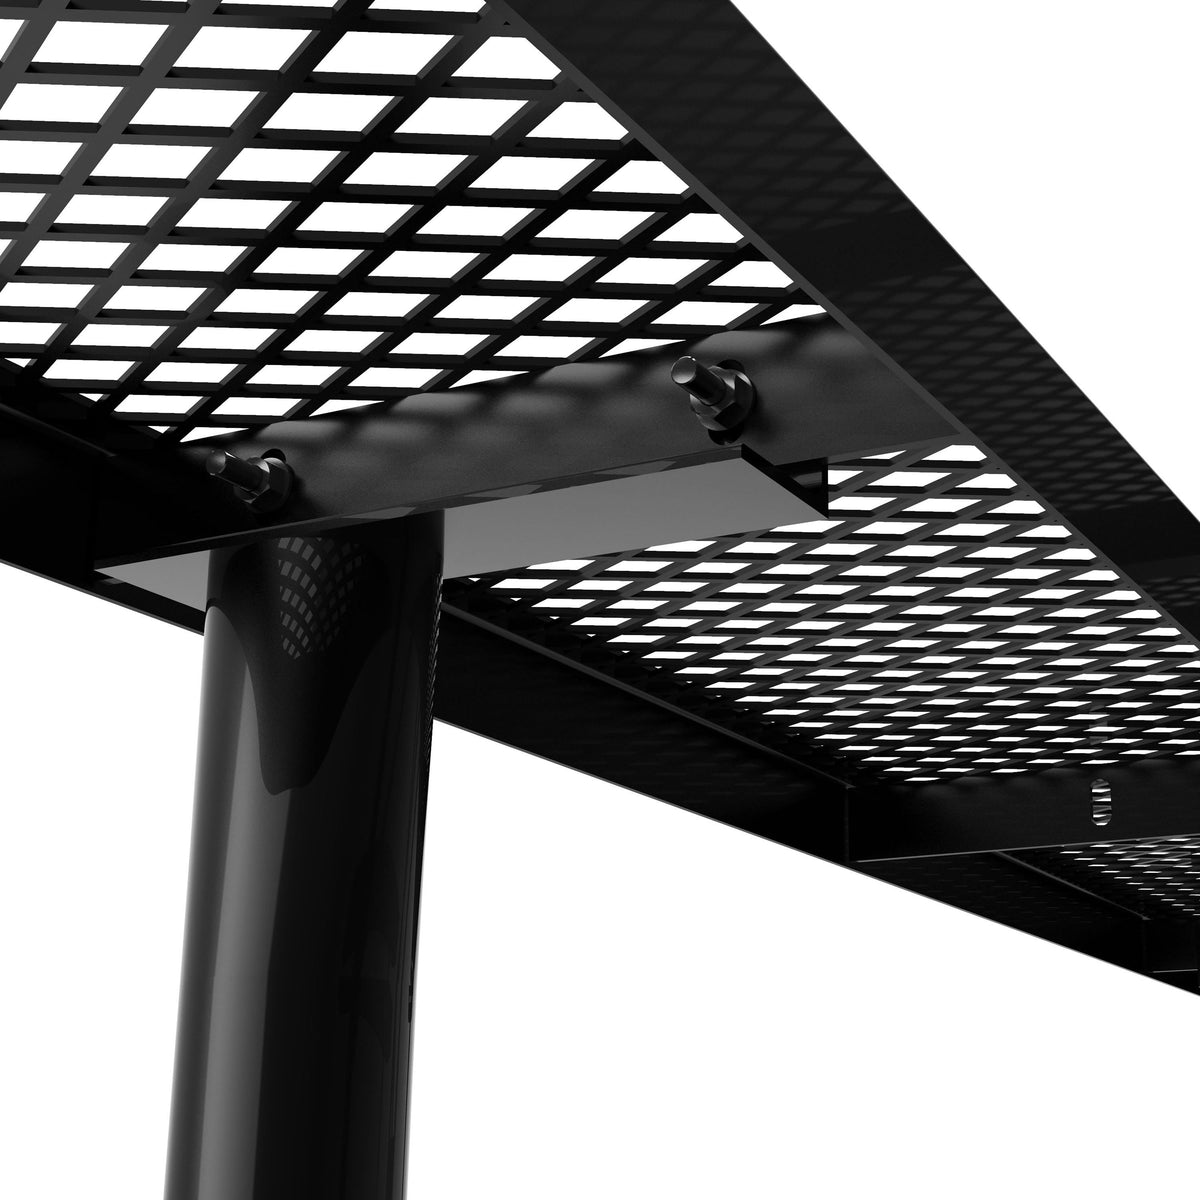 Black,8' |#| Commercial Grade 8' Rectangular Expanded Mesh Metal Outdoor Picnic Table - Black